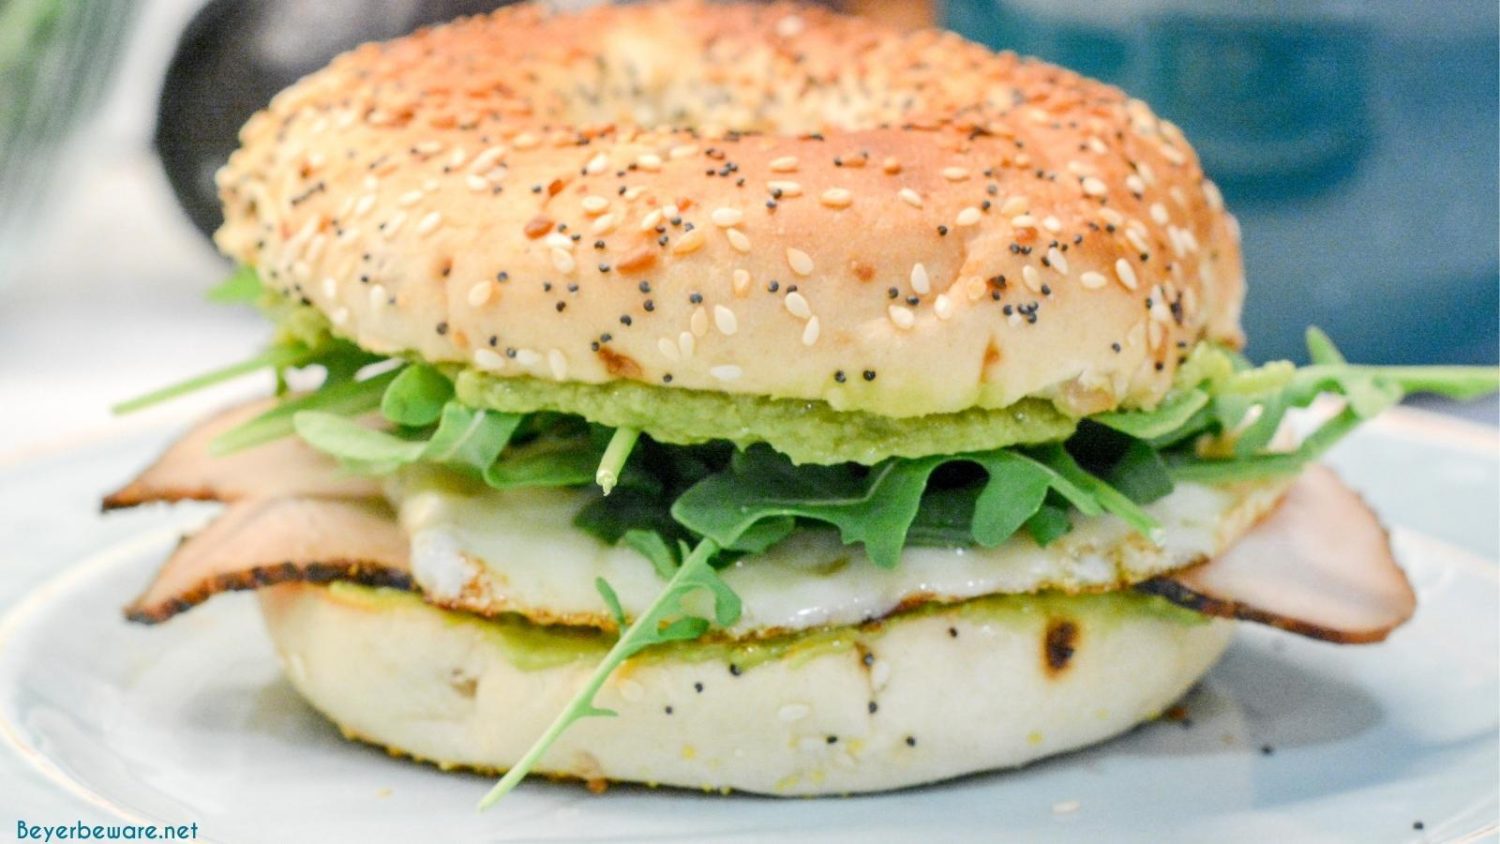 This everything bagel egg sandwich is filled with avocado, turkey, egg, cheese, and topped off with arugula. 